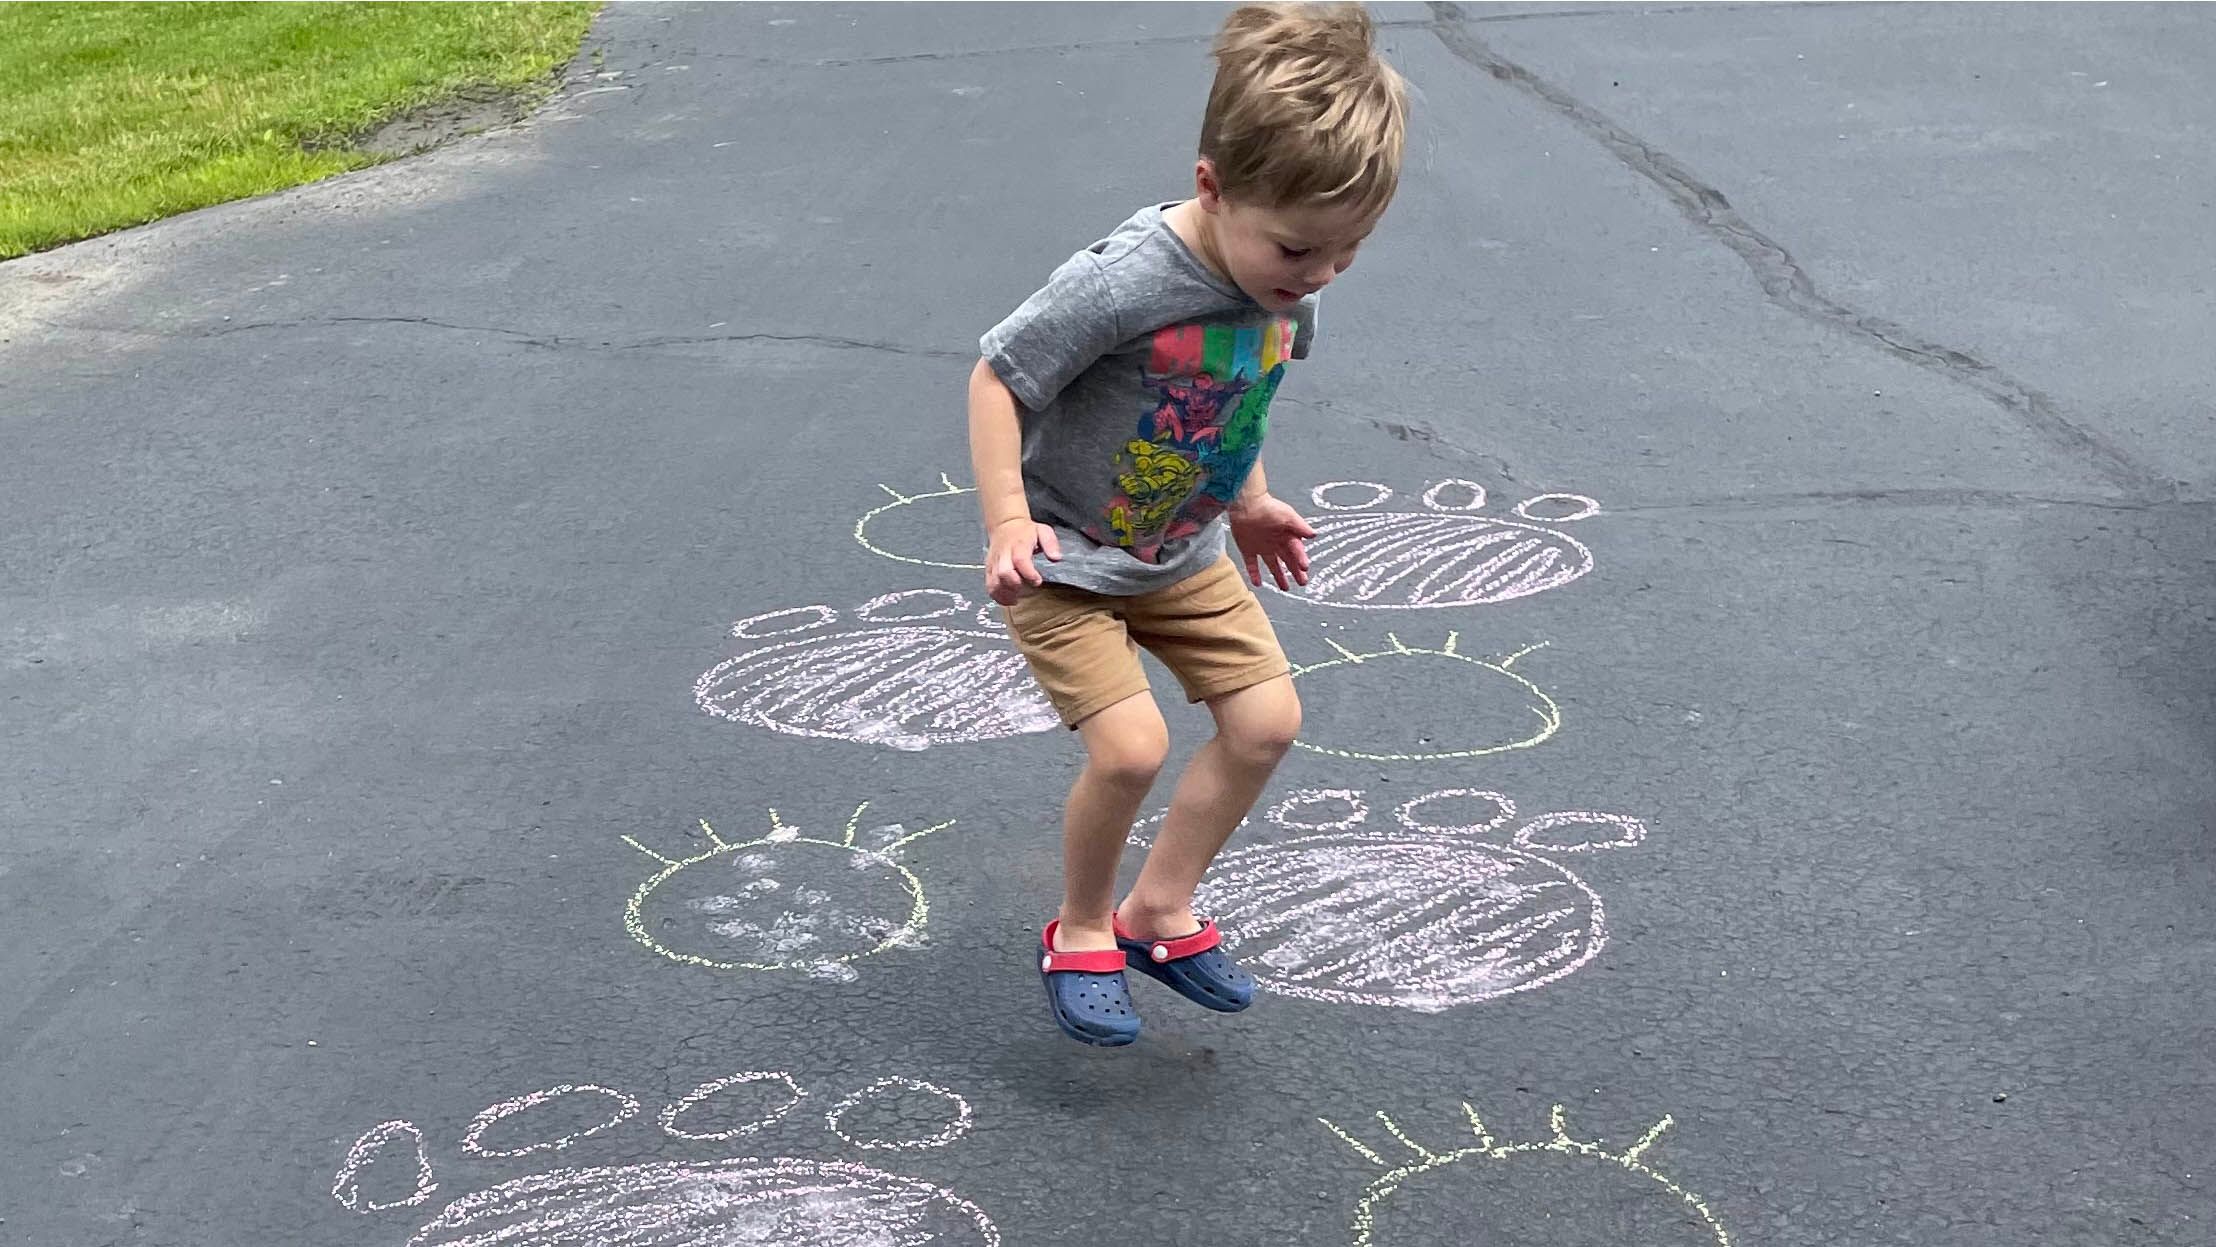 Child jumping on cement surrounded by chalk animal tracks drawings